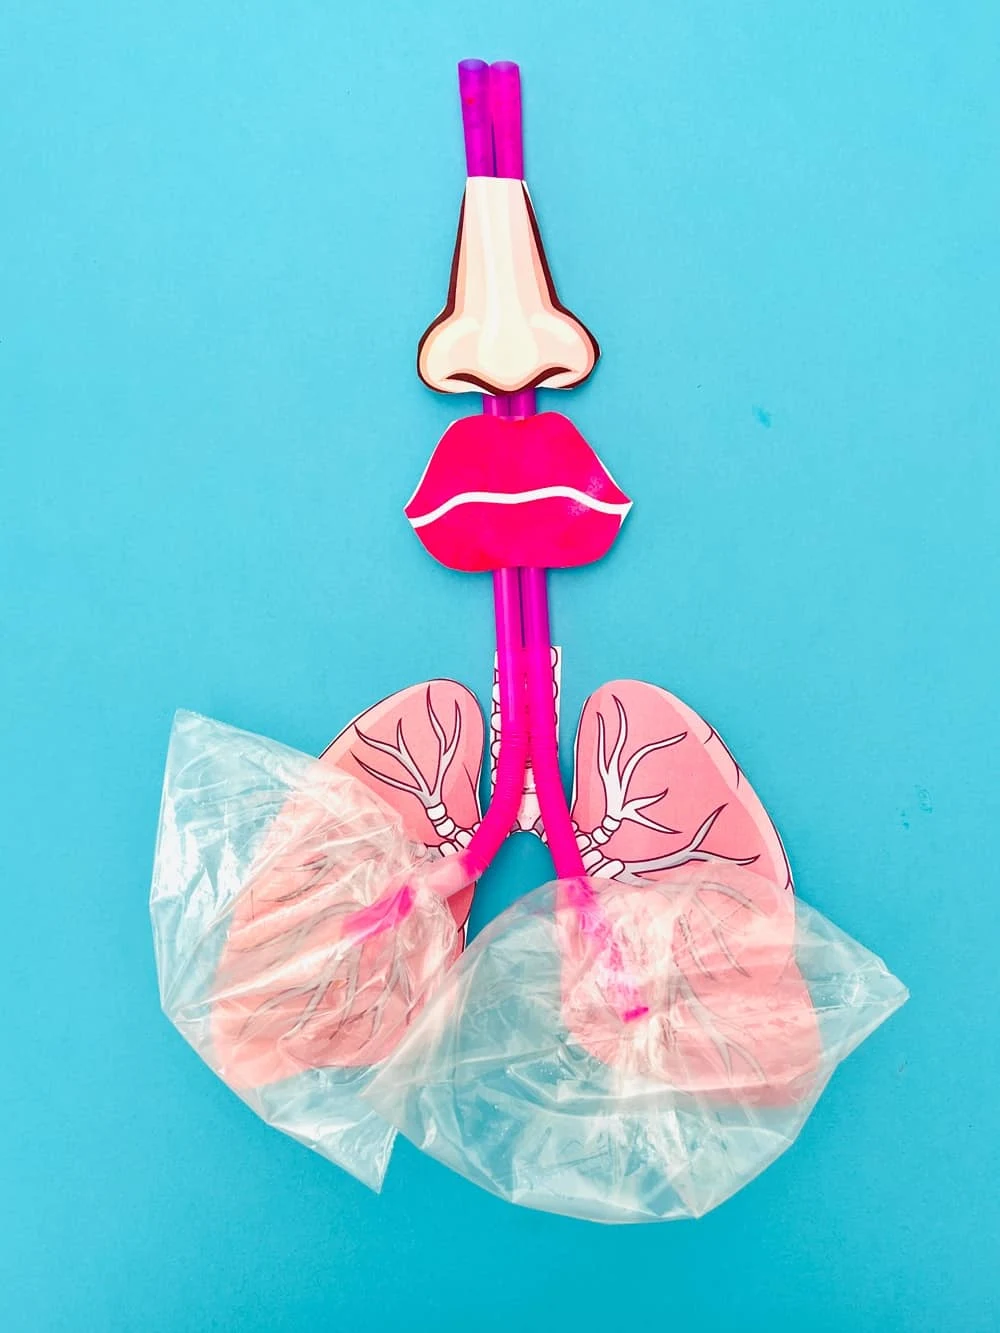 how to make a lung model for kids